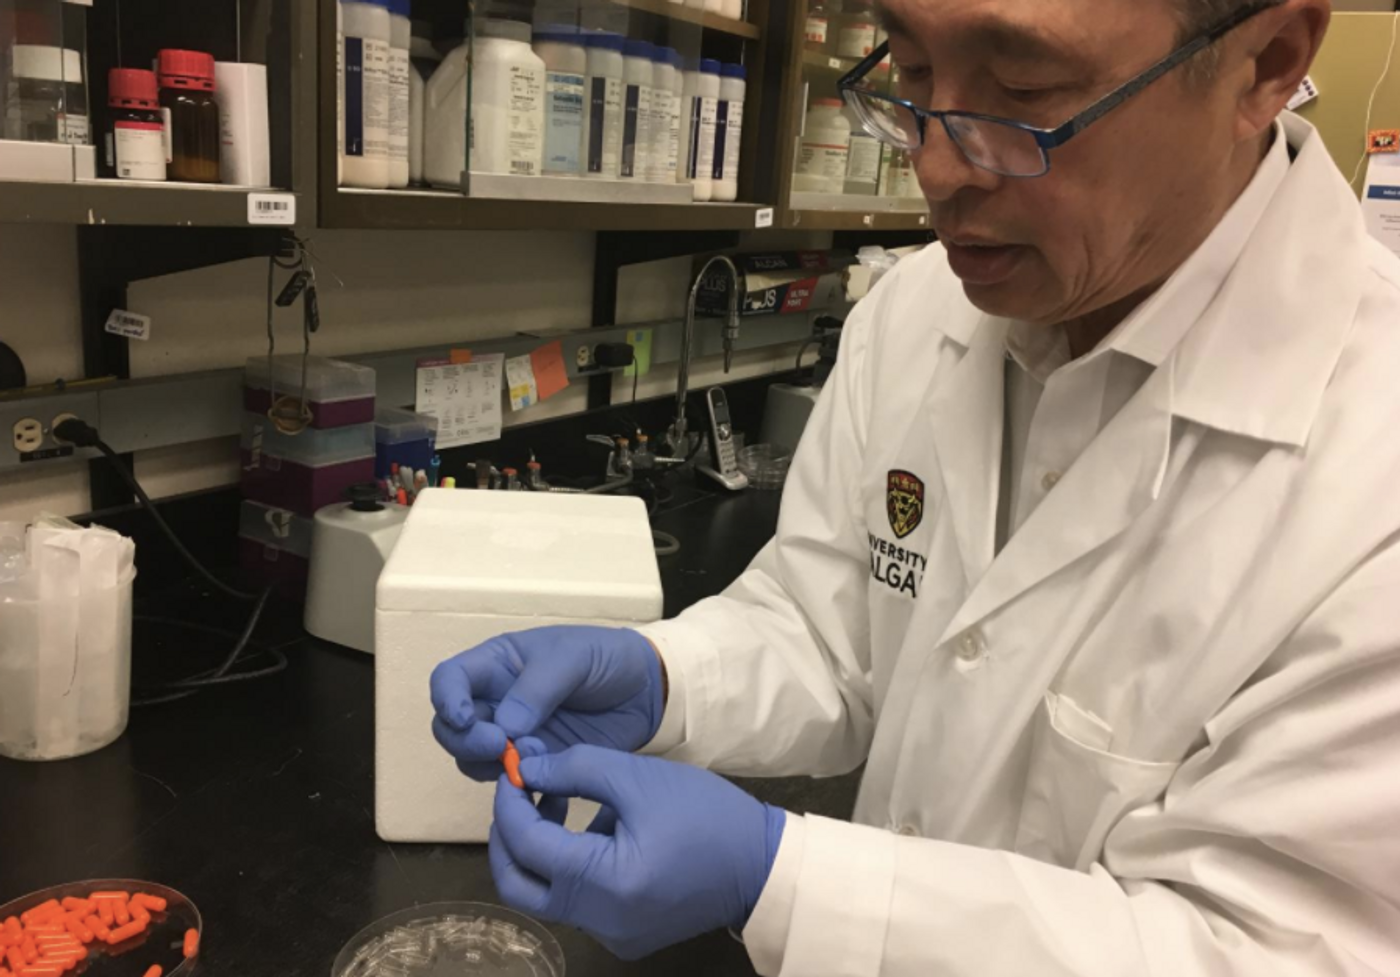 This is Dr. Thomas Louie with the fecal transplant capsules. / Credit: Cumming School of Medicine